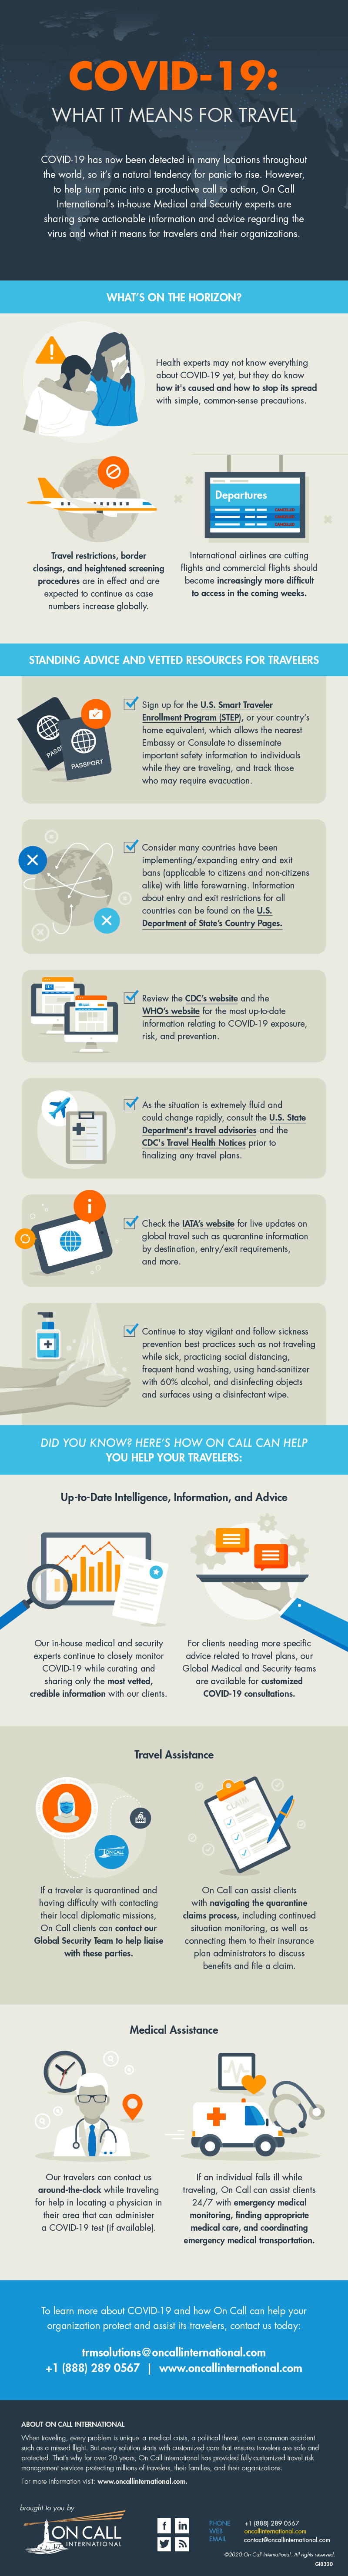 On Call COVID-19 Infographic